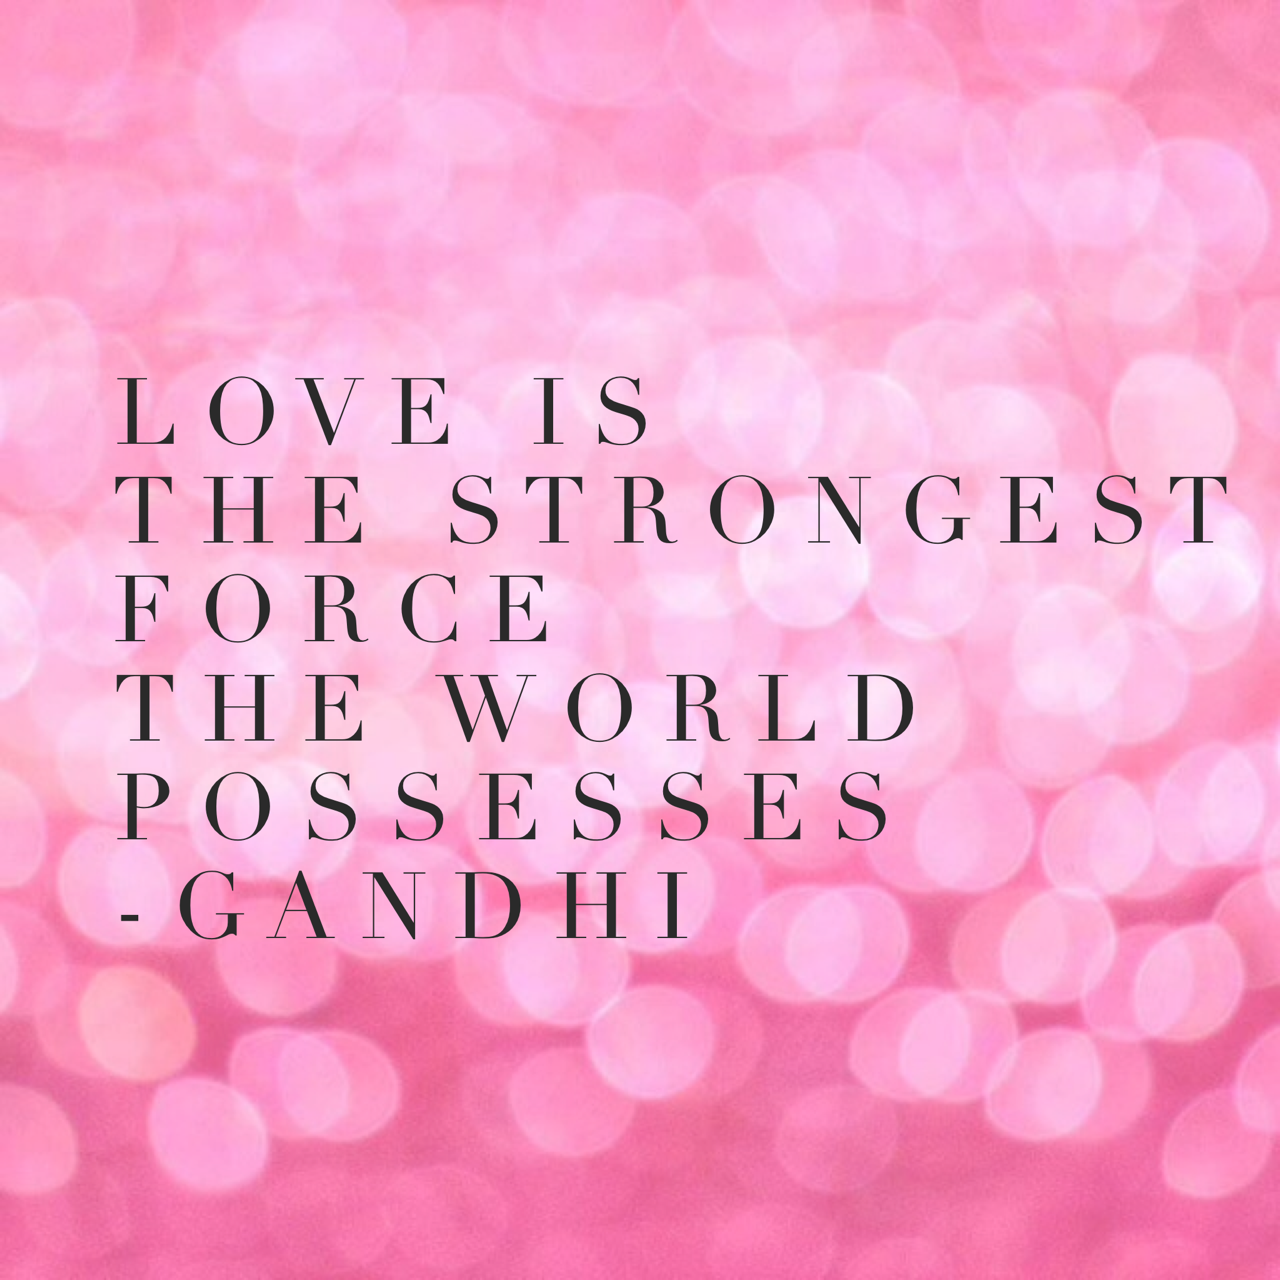 Love is the strongest force